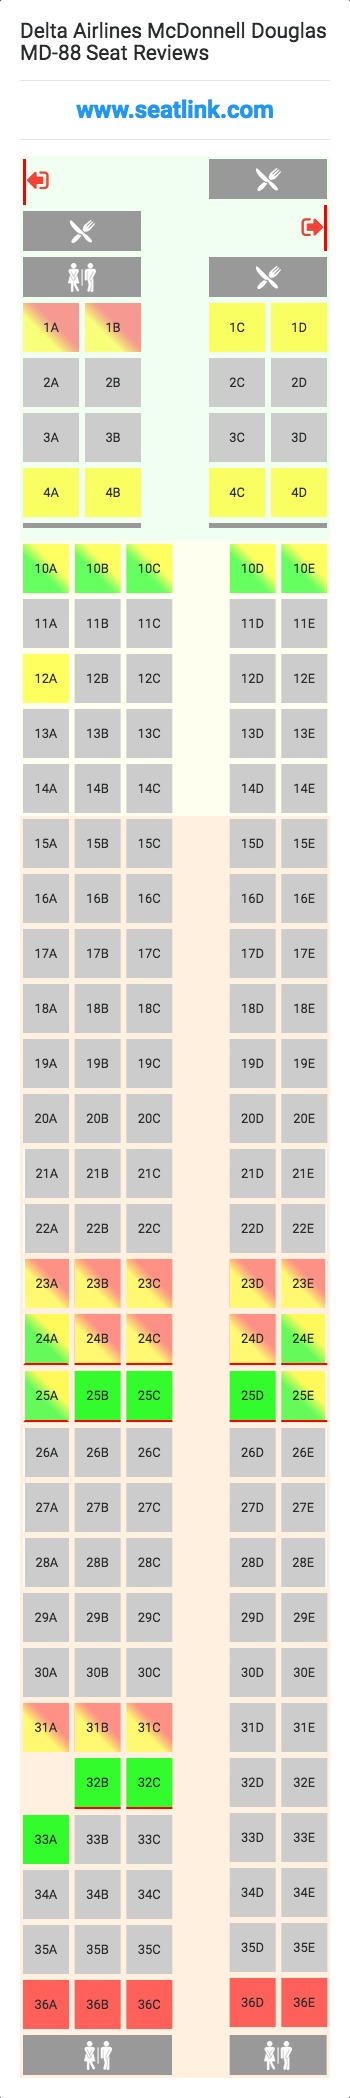 Delta Airlines McDonnell Douglas MD-88 Seating Chart ...